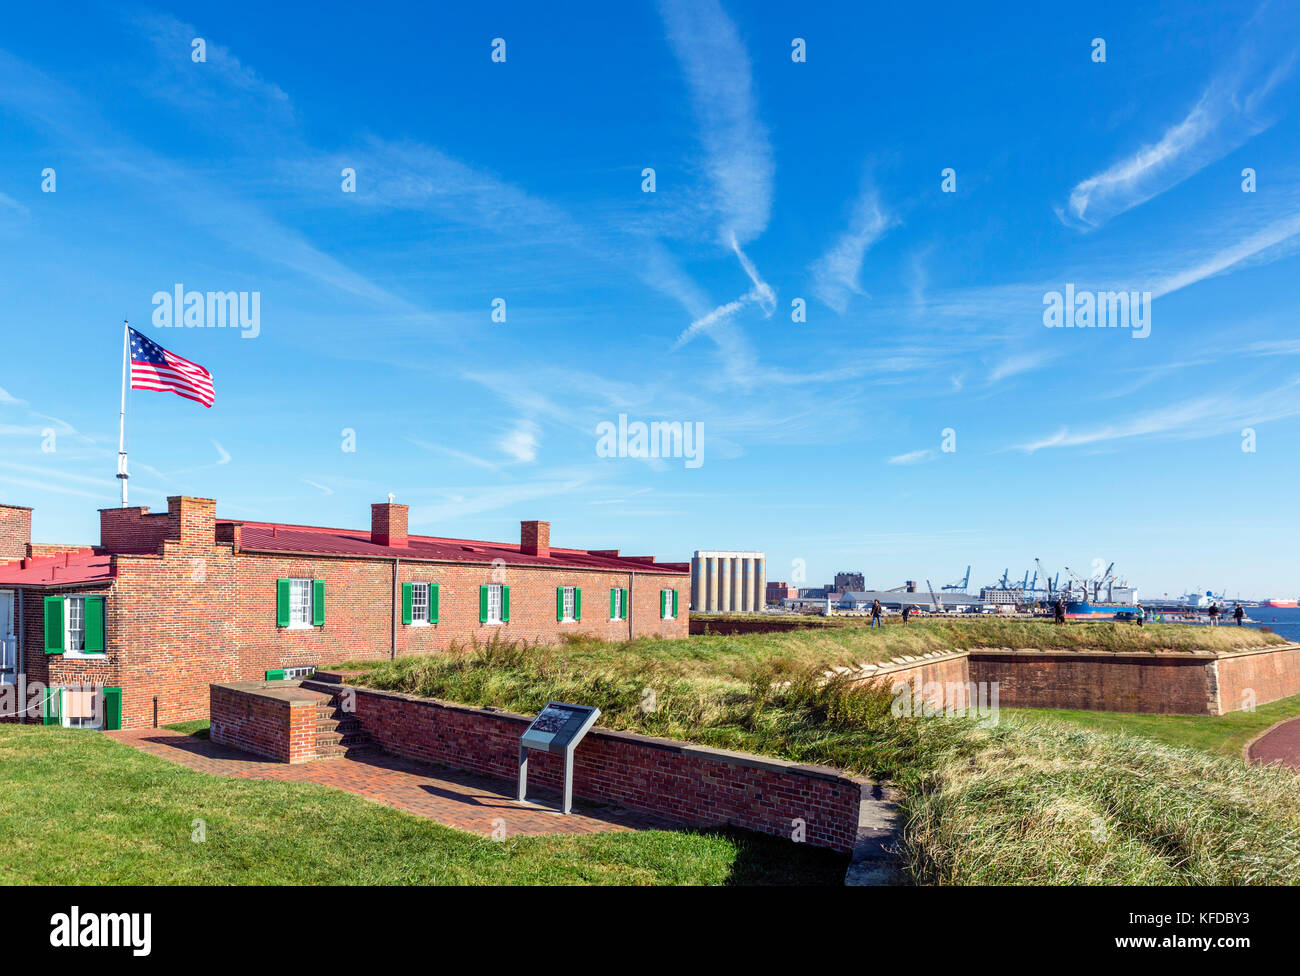 Le Fort McHenry National Monument, Baltimore, Maryland, USA Banque D'Images